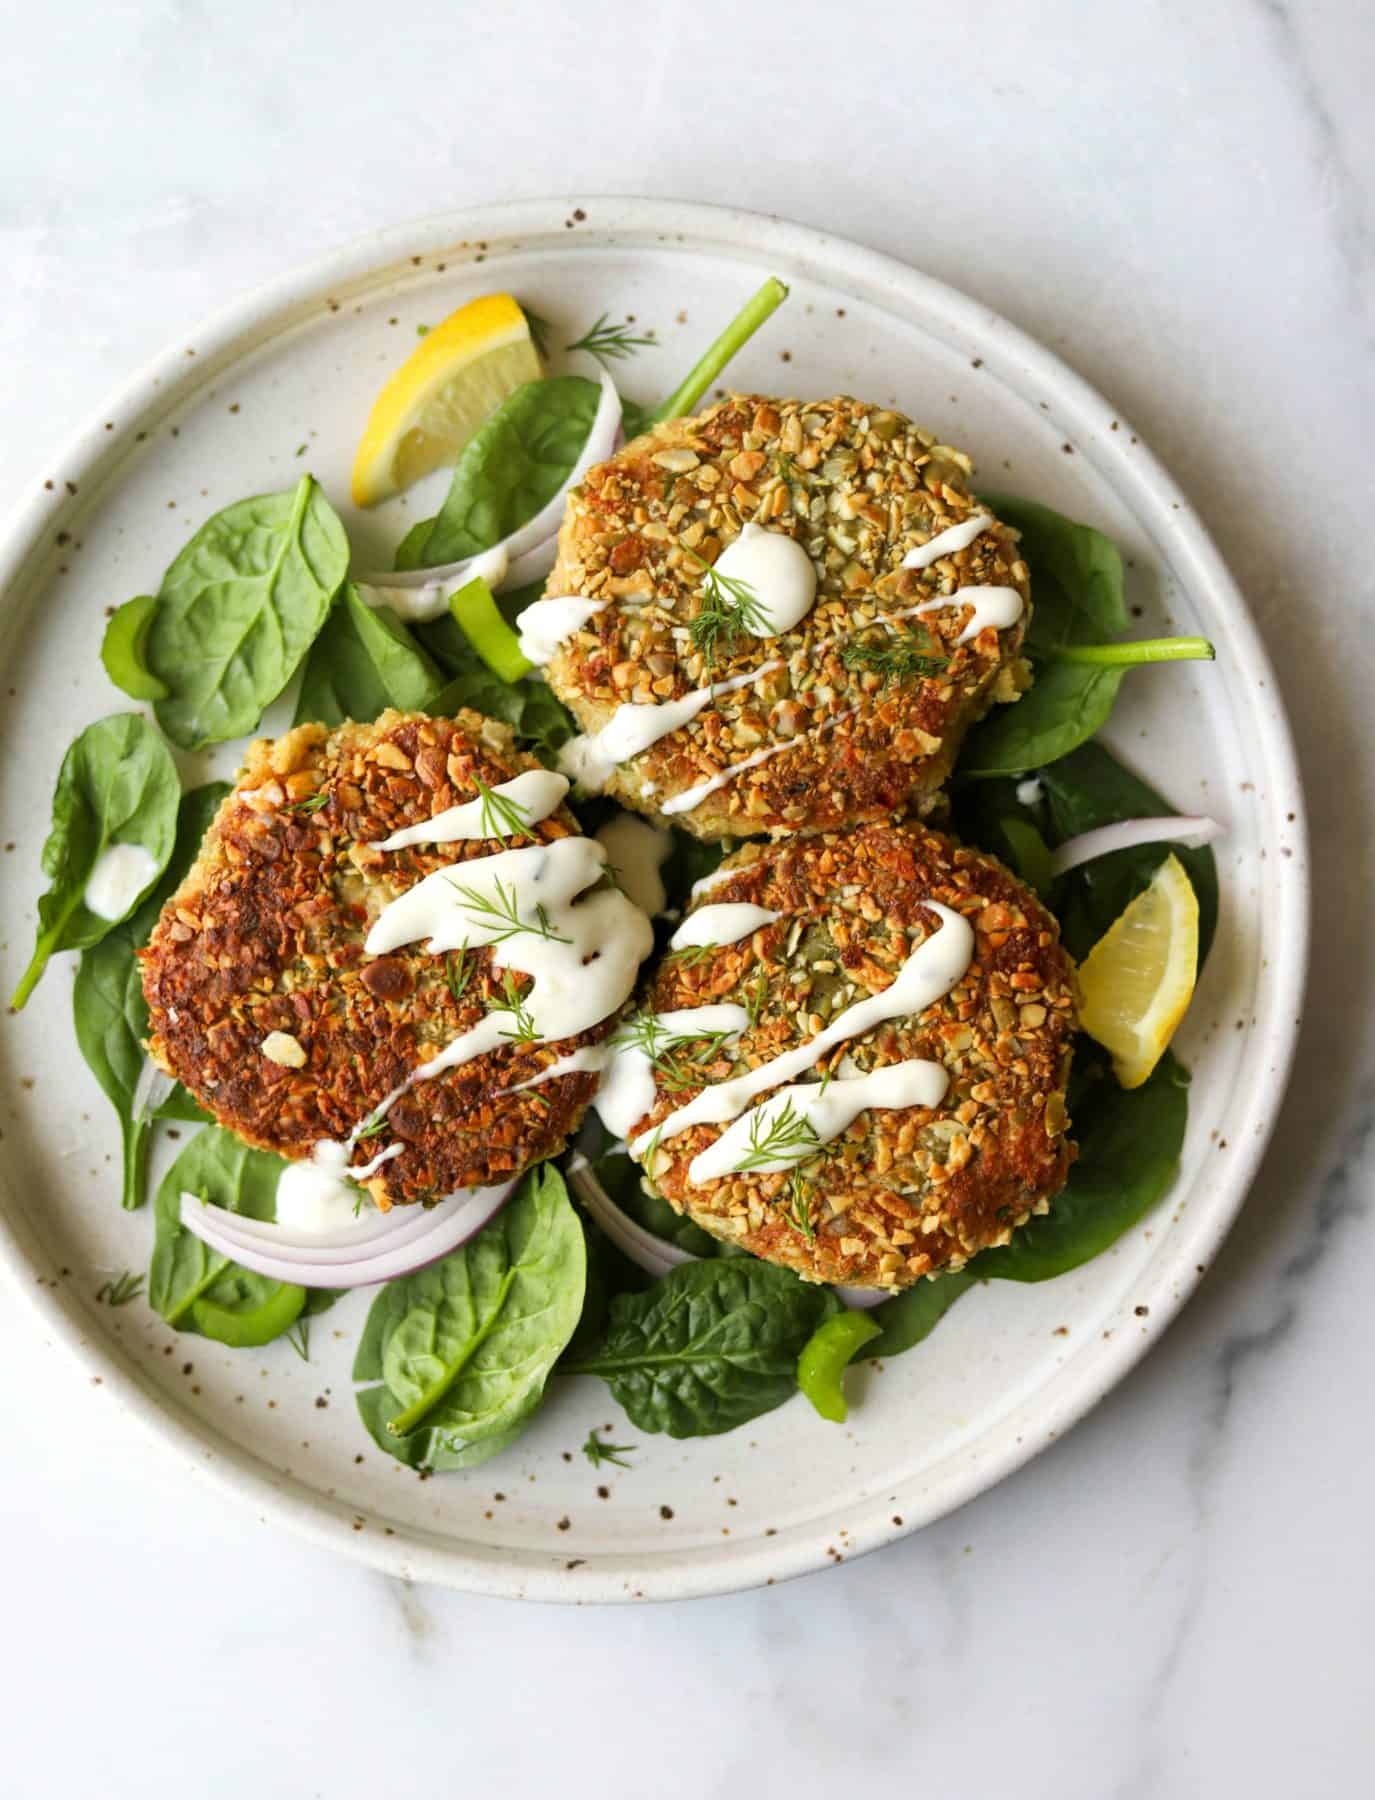 Tuna cakes on top of spinach (a leafy green)